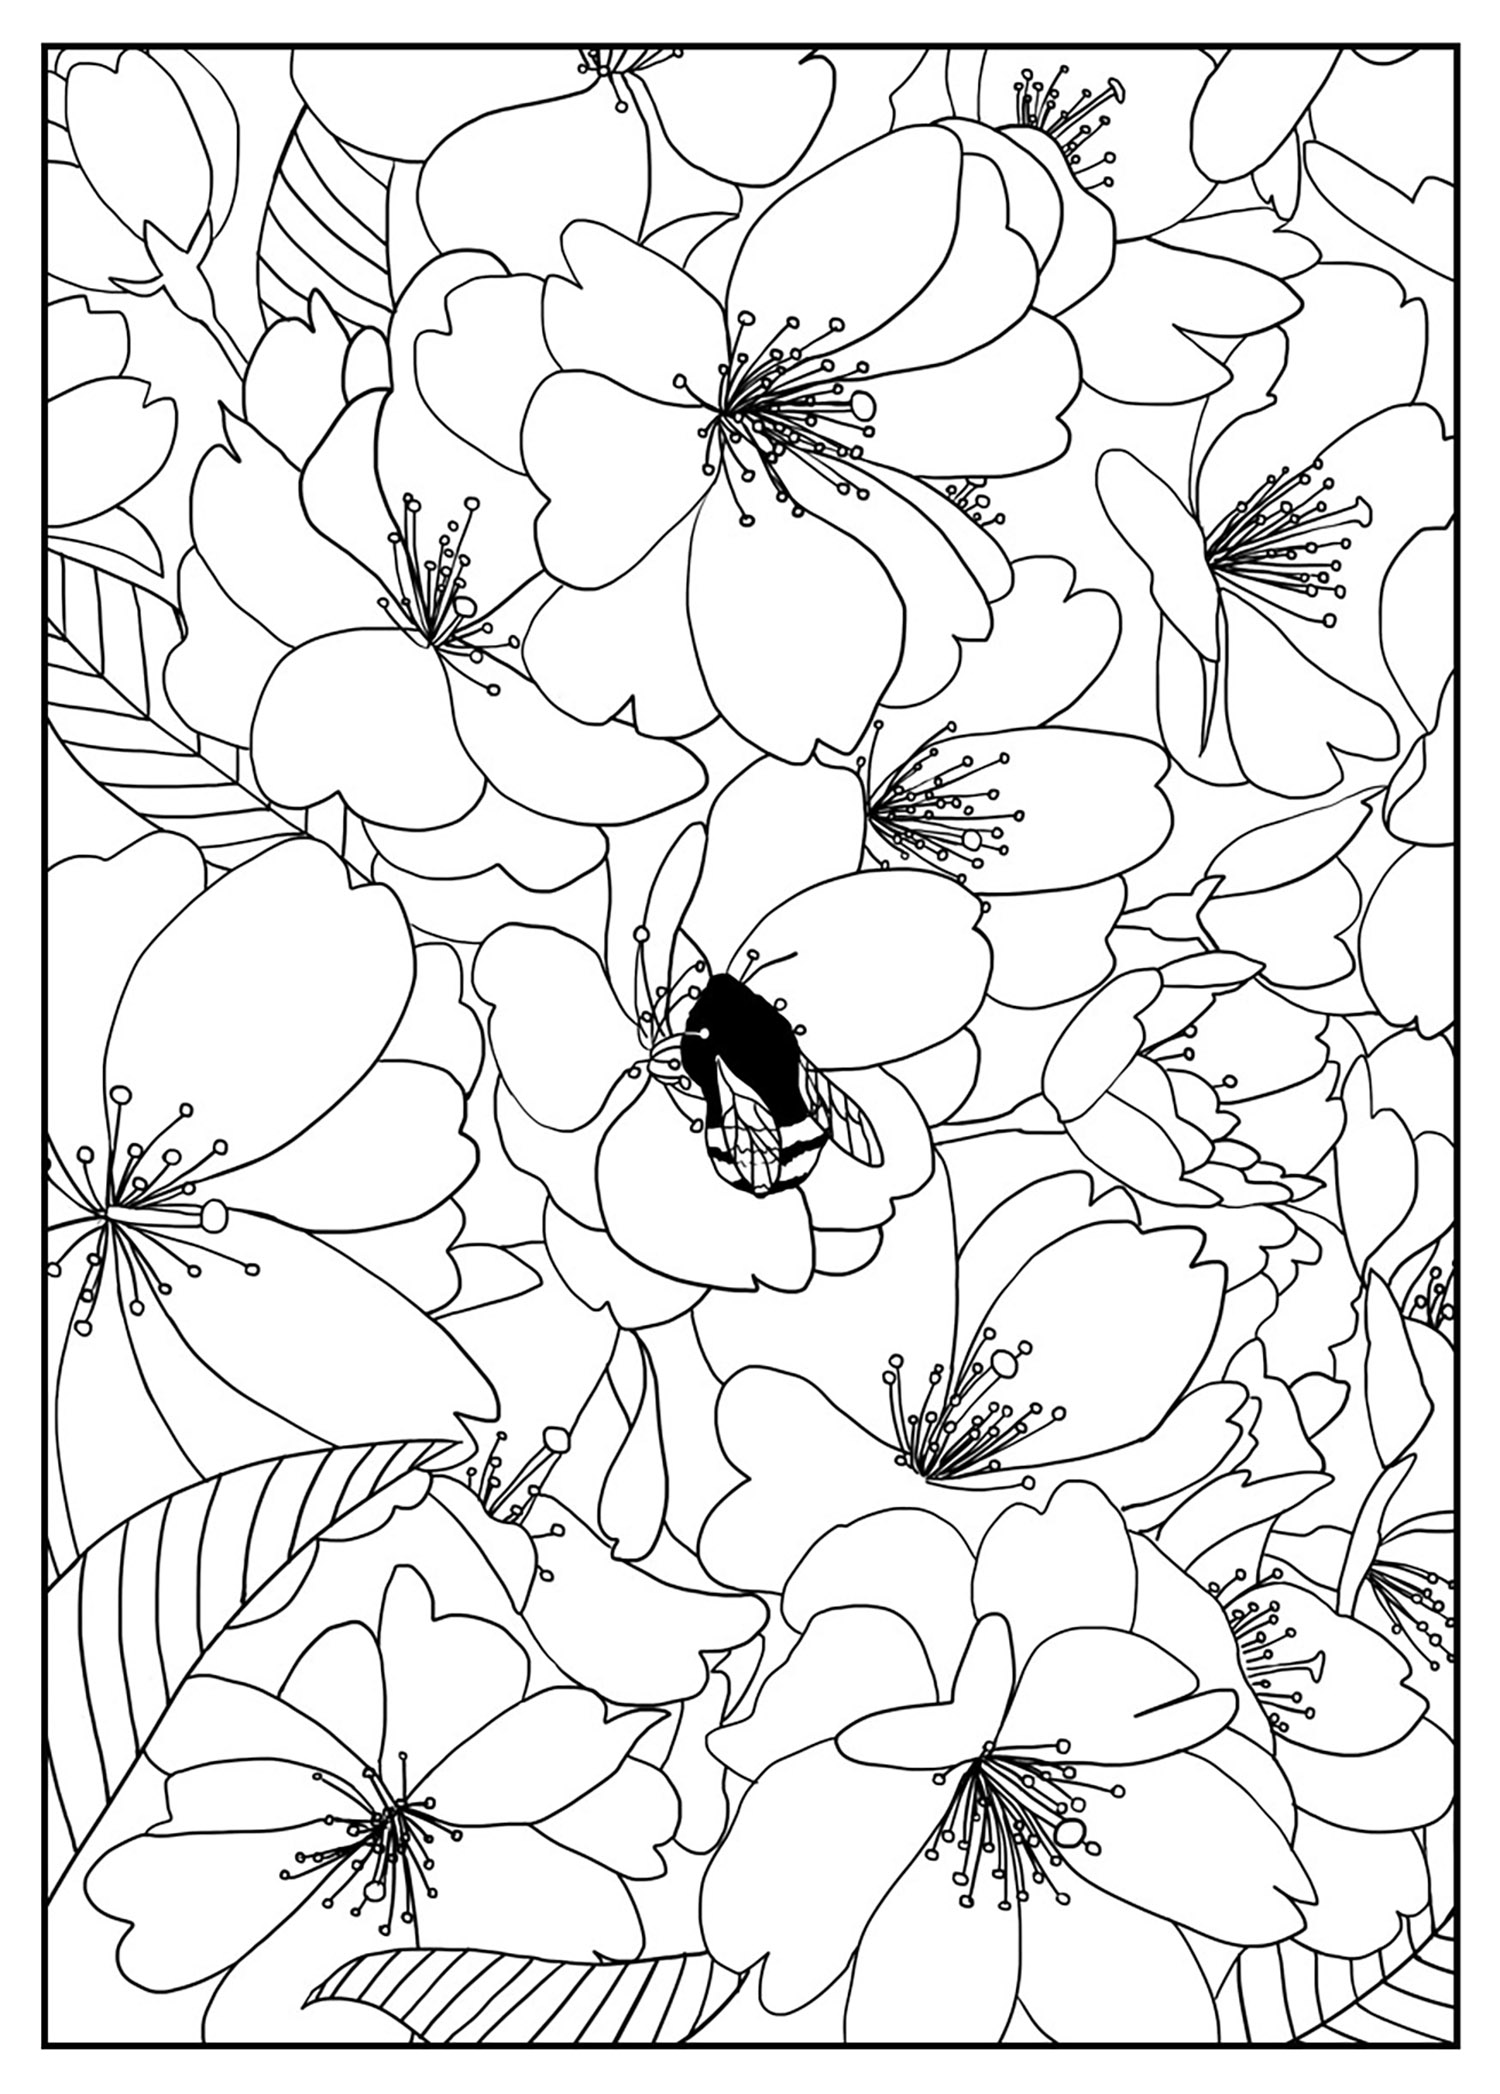 Free Adult coloring page to download